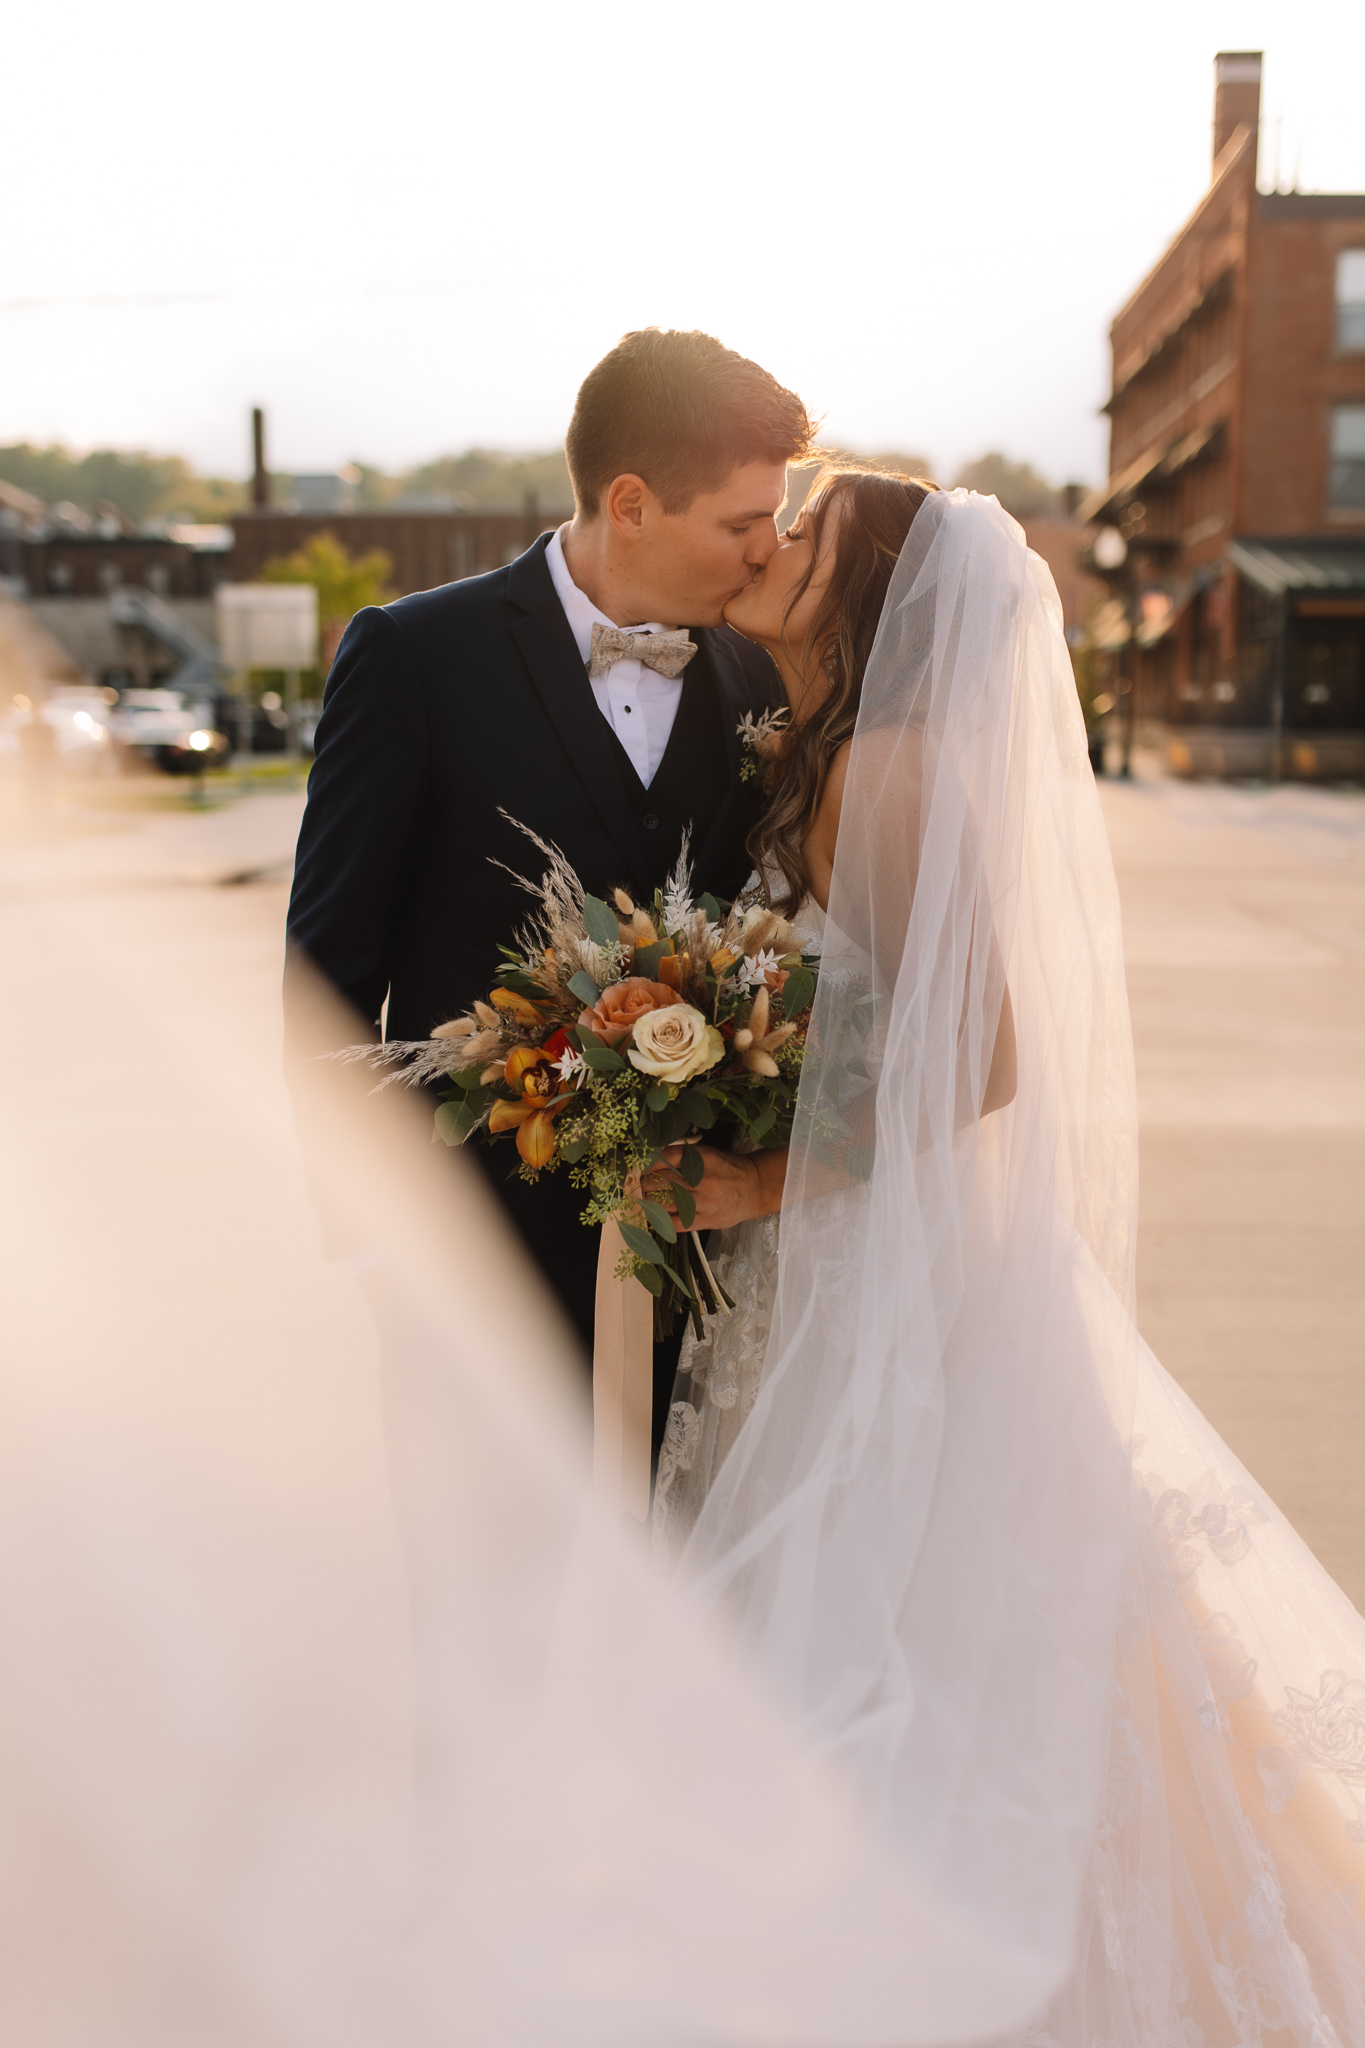 Bride and Groom Portraits in Stillwater in front of the Iconic bridge crossing the St. Croix river